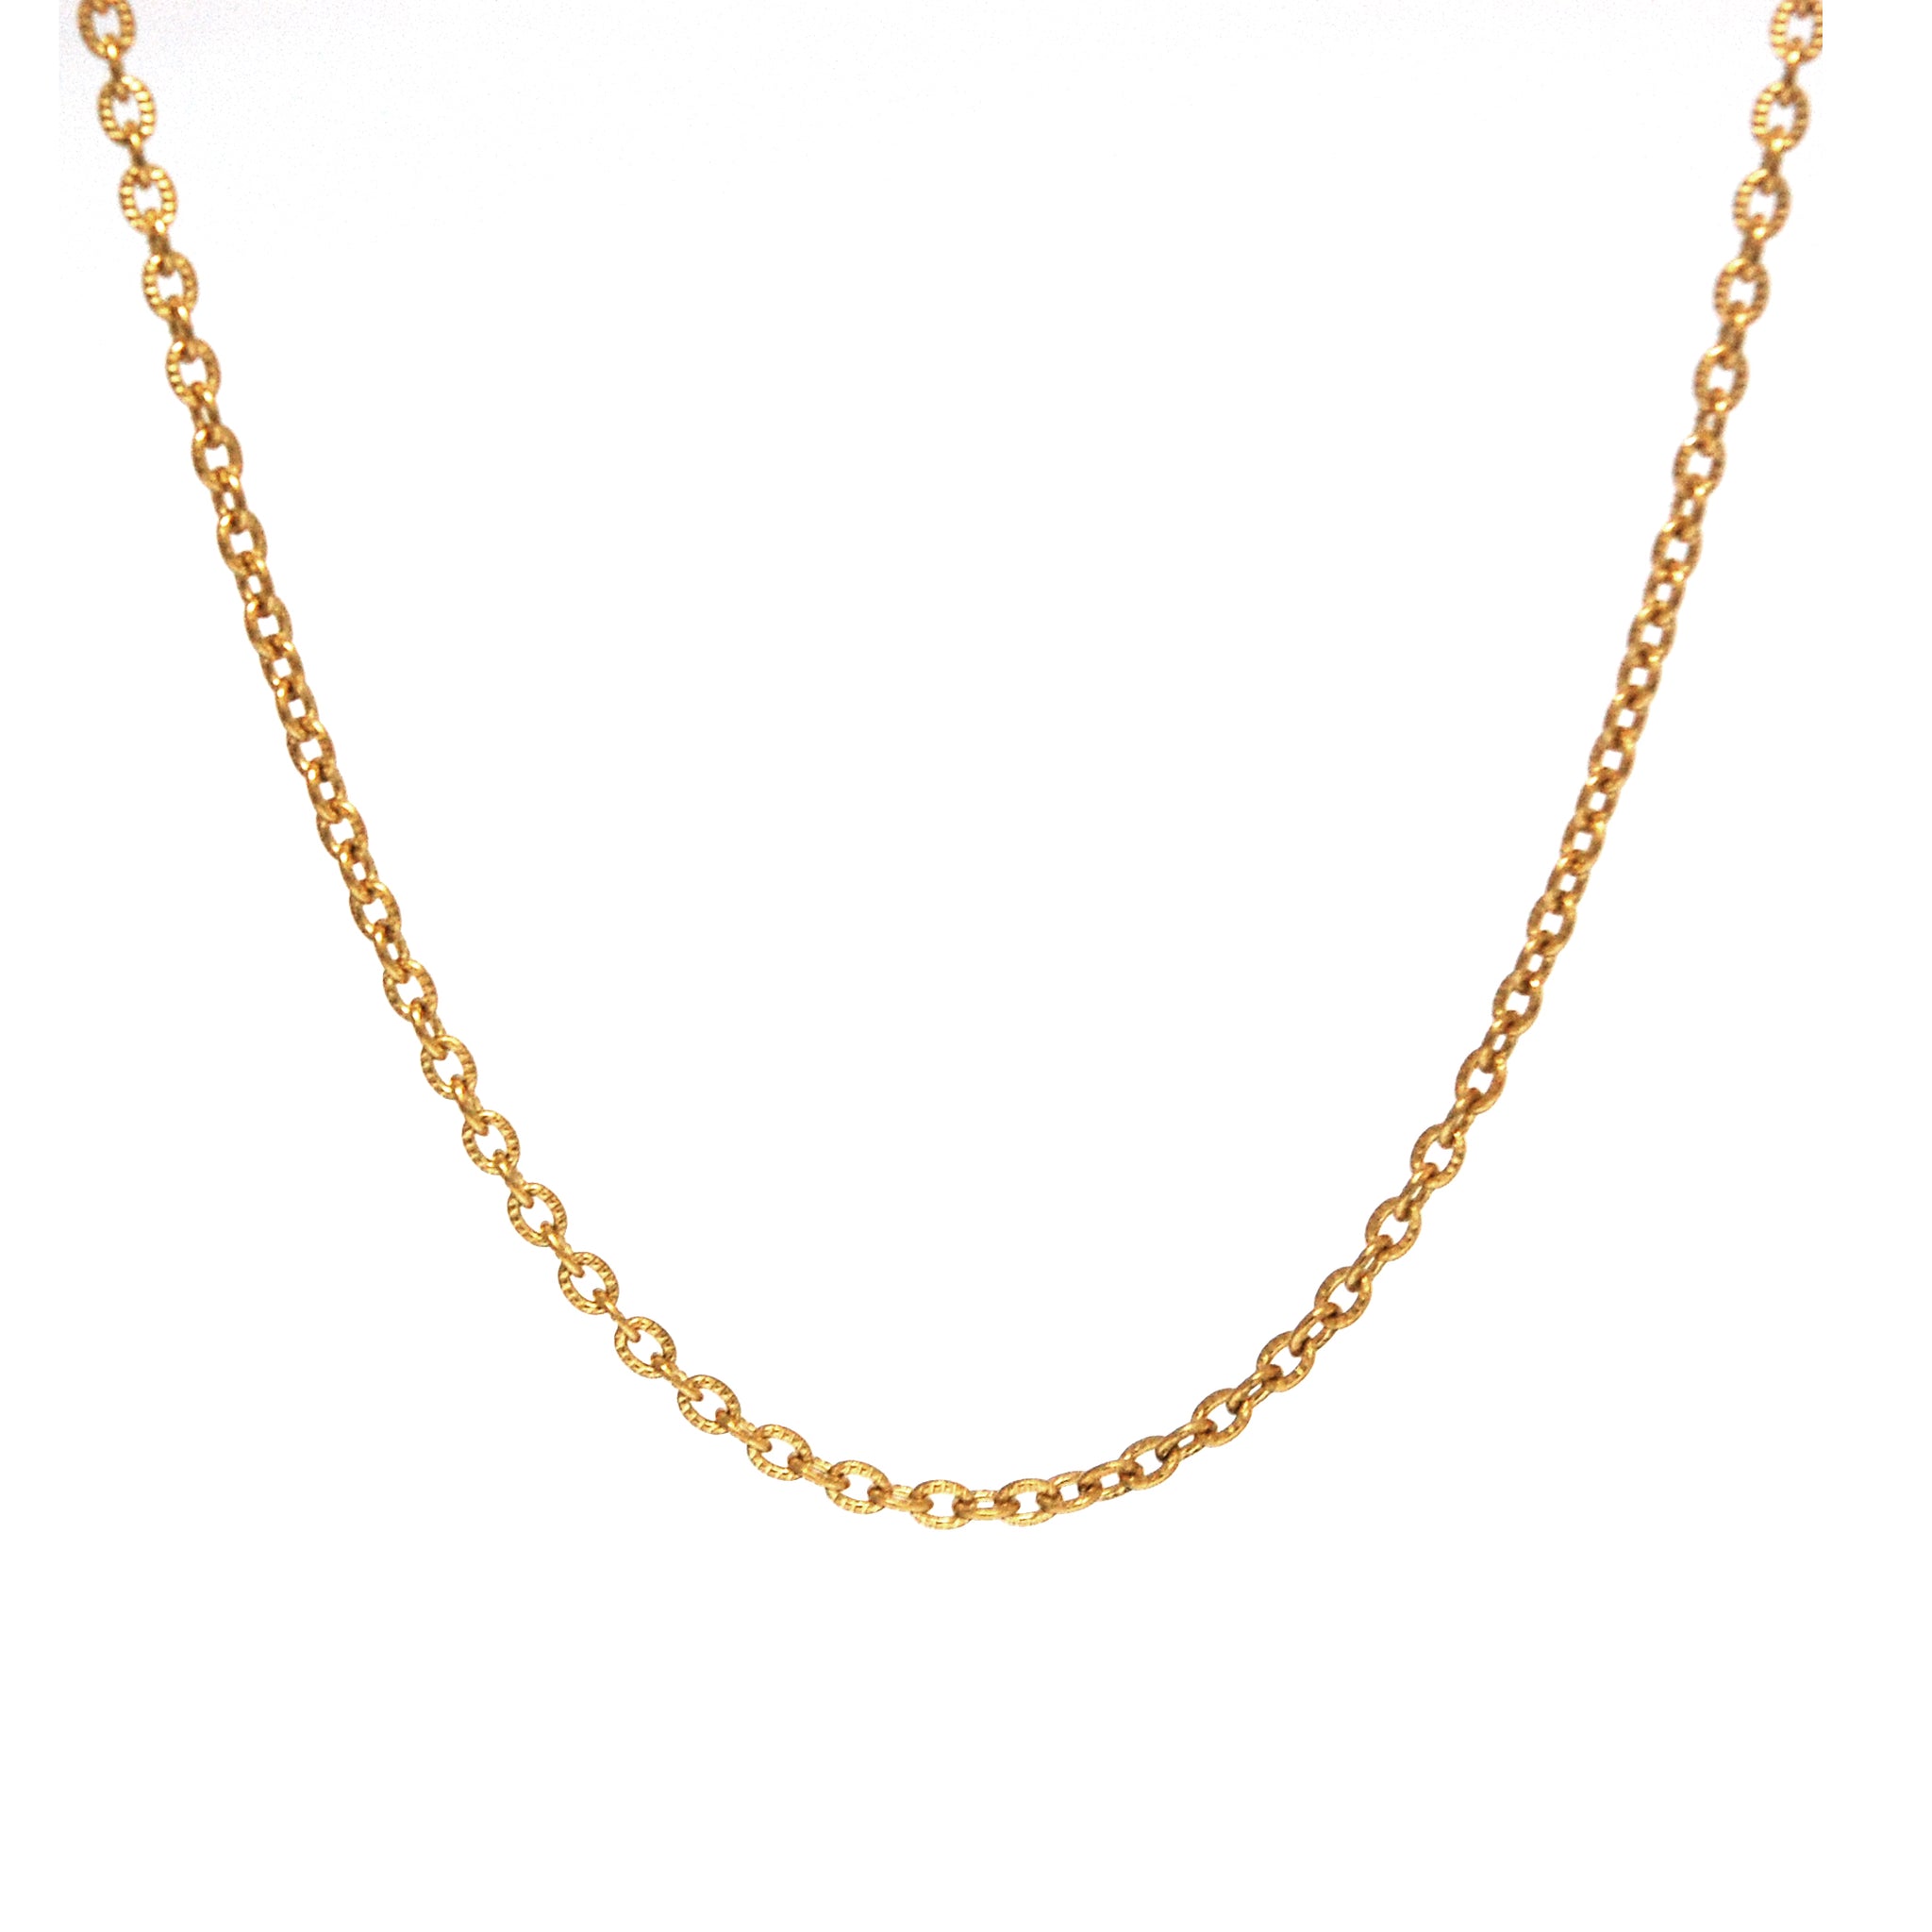 ESCH 4865: 19" Gold Plated Etched Elongated Round Link Chain